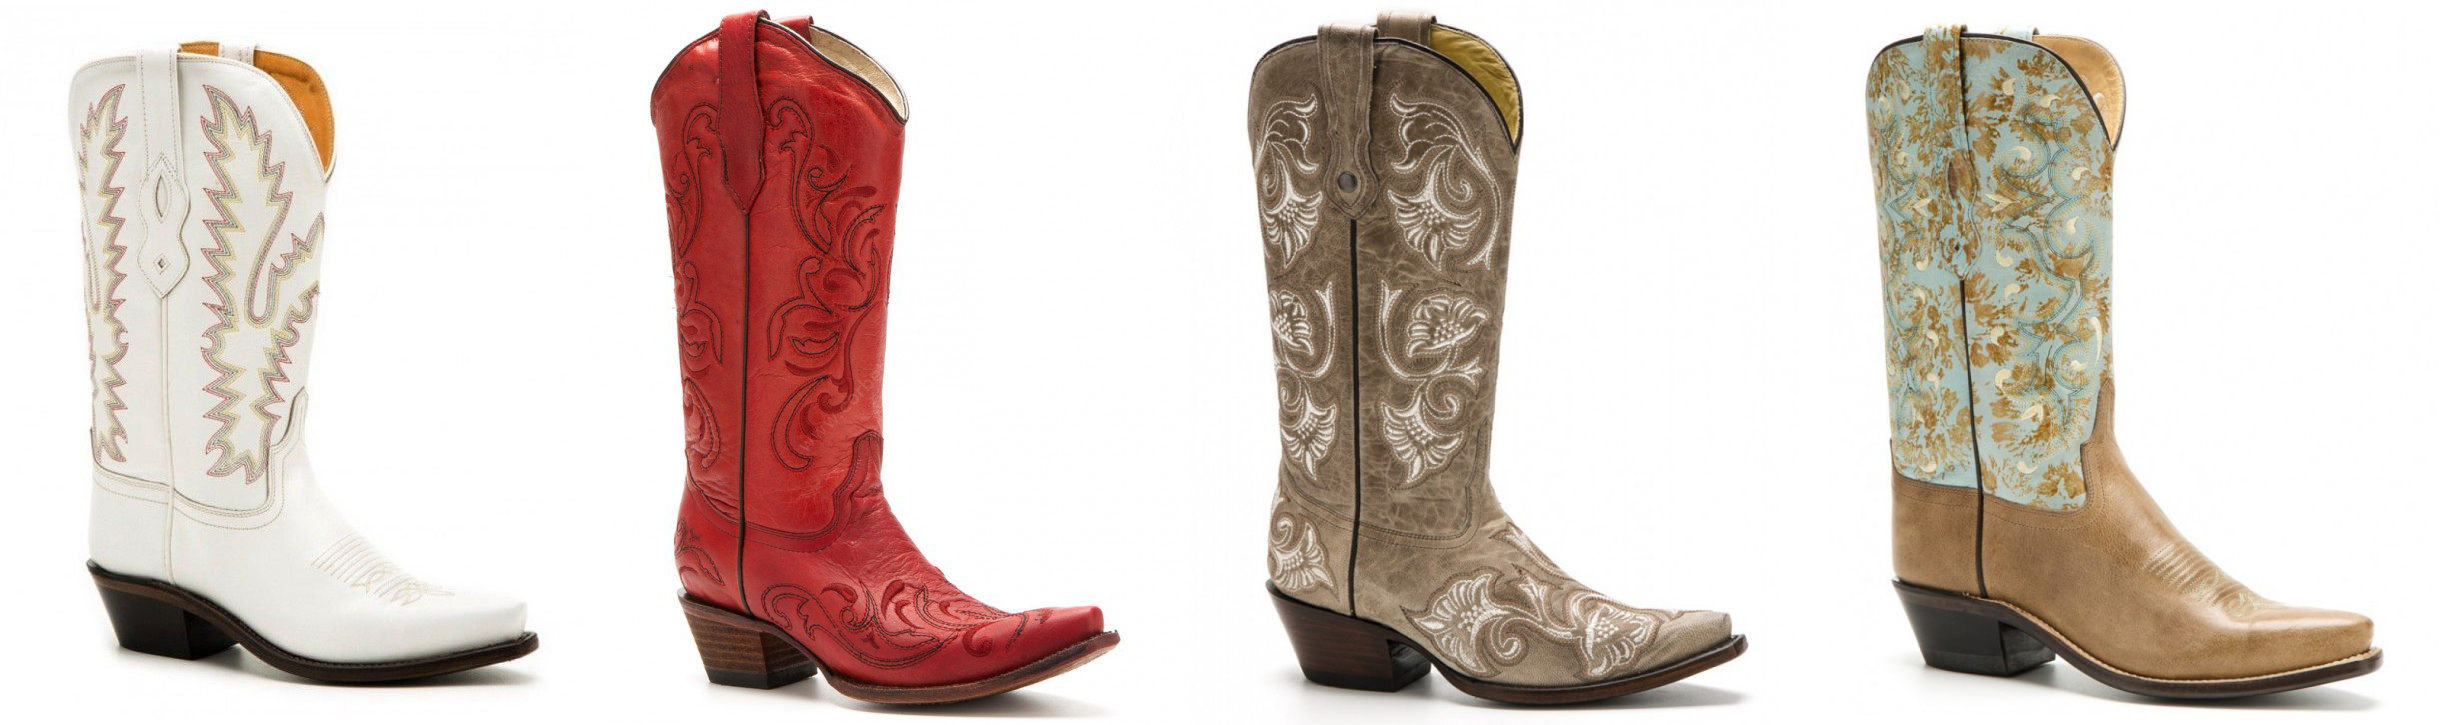 cow skin cowboy boots